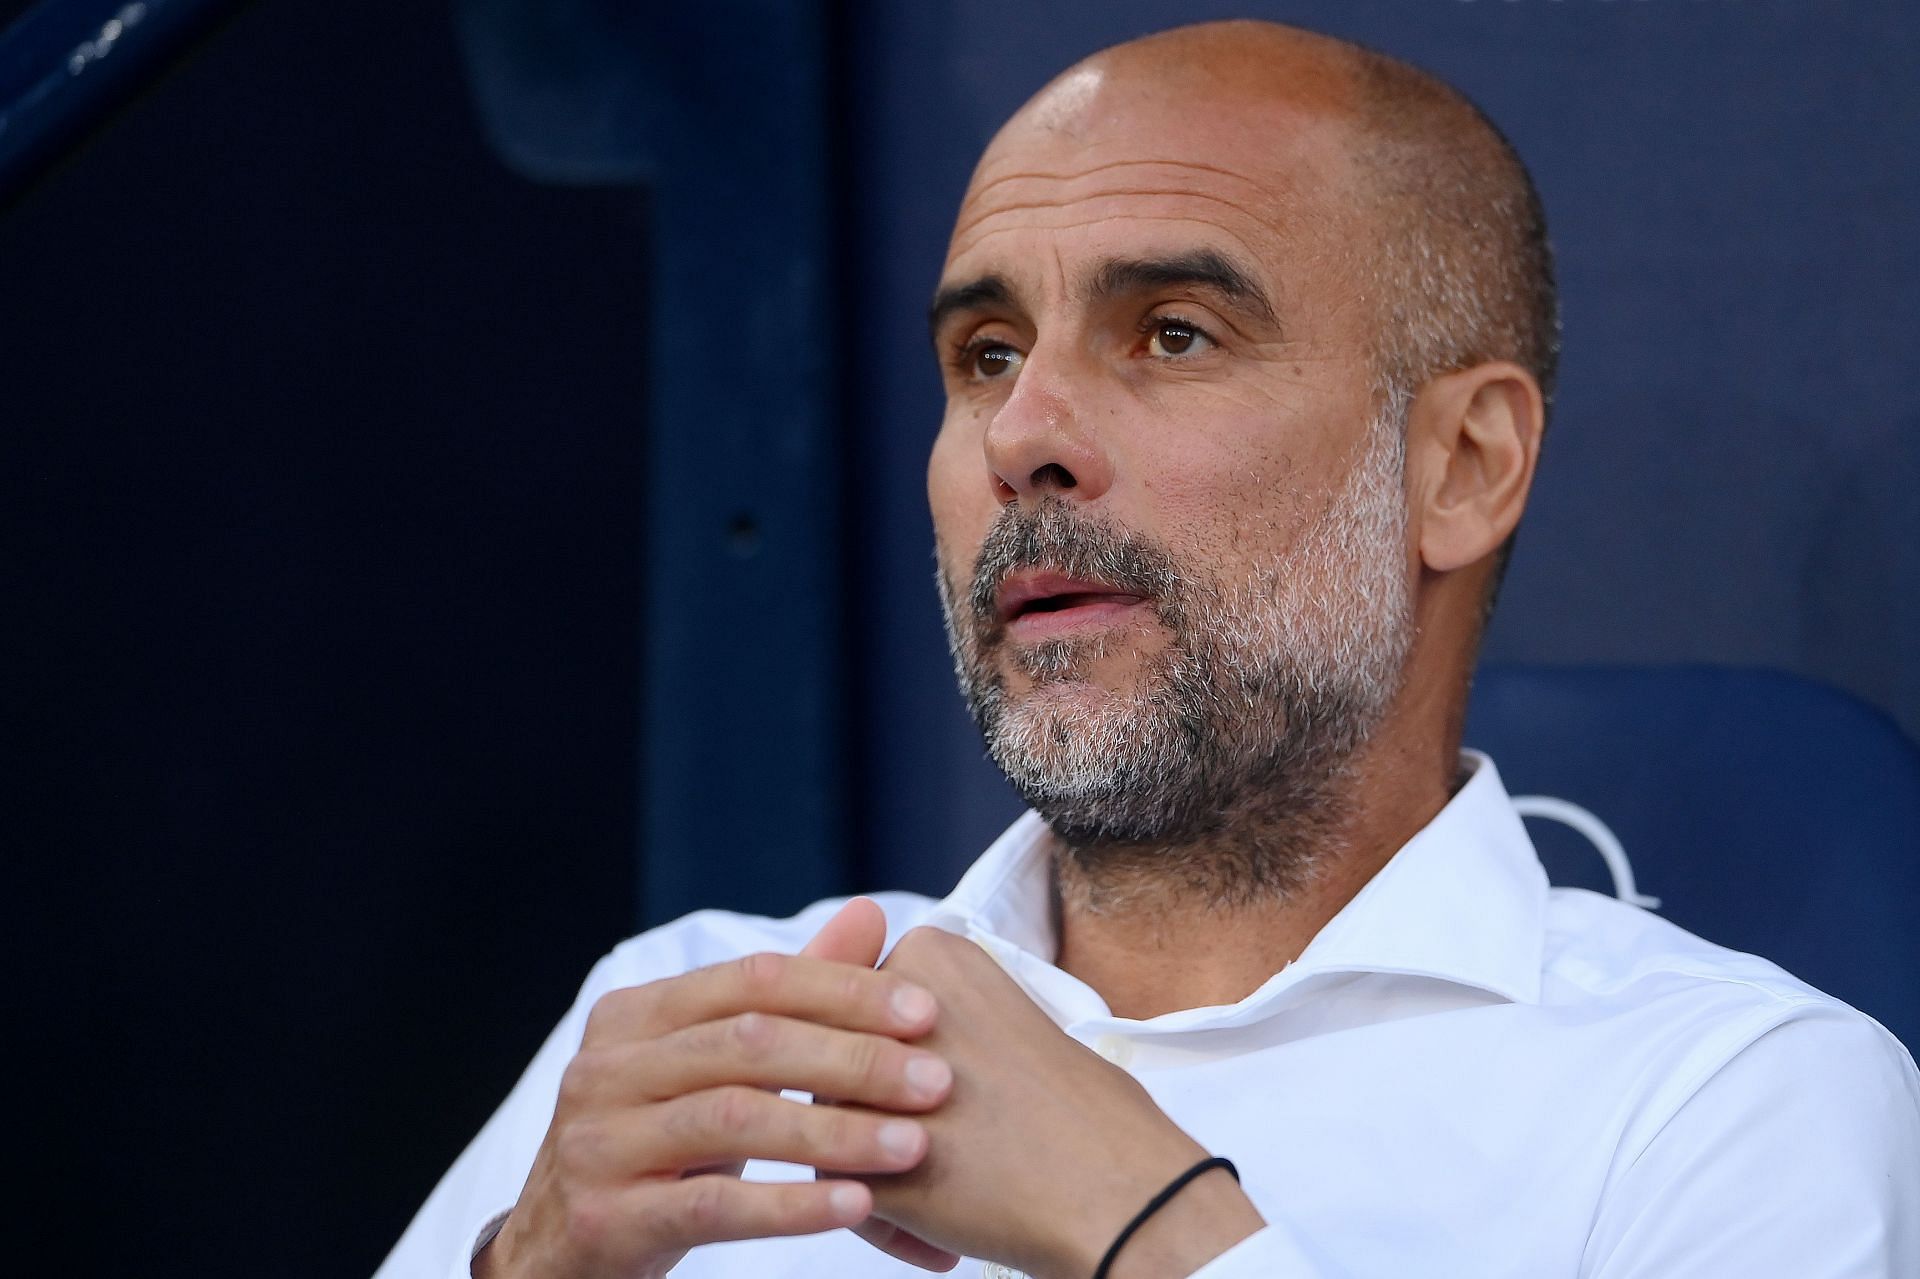 Guardiola is yet to secure a Champions League trophy at Manchester City